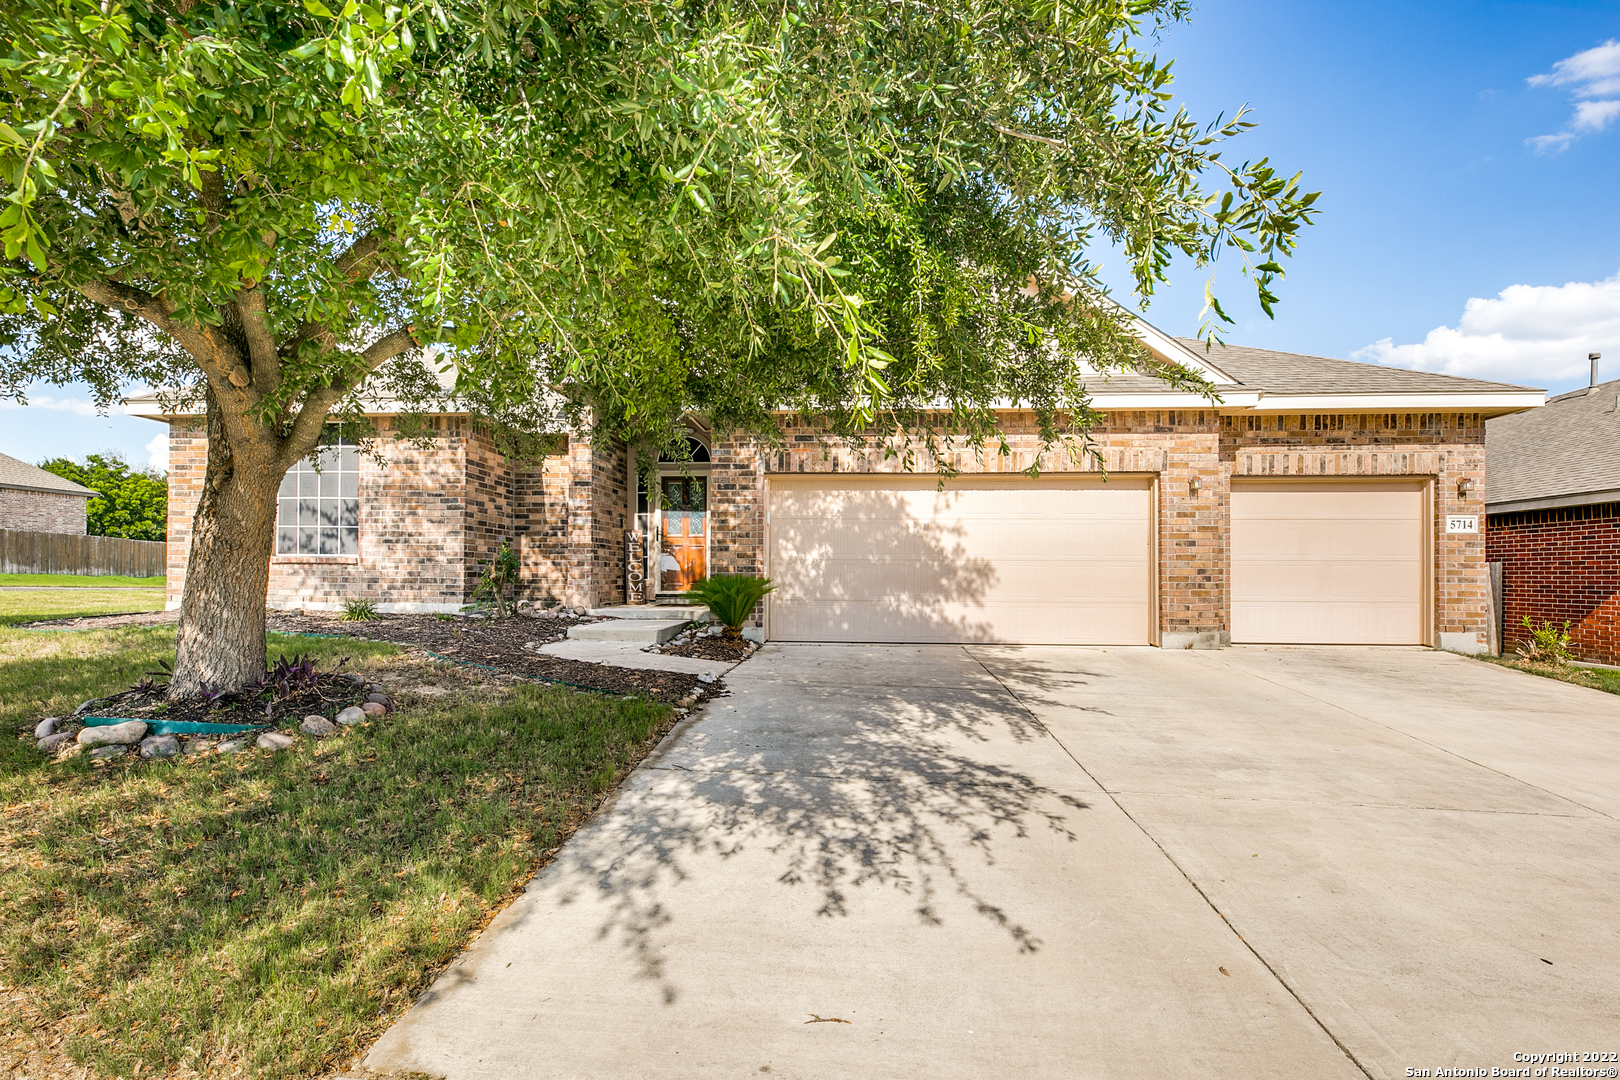 Welcome home! This lovely property is nestled on a corner lot in the well-established neighborhood of Alamo Ranch and showcases upgrades of plenty! Upon arrival, charming curb appeal greets you along with a three-car garage. This home offers a split level floor plan with two-secondary bedrooms and a primary suite of the first level, and a dedicated bedroom that could be used as a guest room on the second in conjunction to a very large and spacious game room. A dedicated dining and office space allows for homeowners to entertain while enjoying the luxury of closing off space for privacy. This home offers ample storage space and includes dual HVAC units, solar screens, radiant barrier in the attic, and recently upgraded kitchen appliances. Outside, you'll enjoy the peace and quiet the neighborhood provides along with a recently done fence along the road side! Close to major highways, eateries, and more, come view this home today!